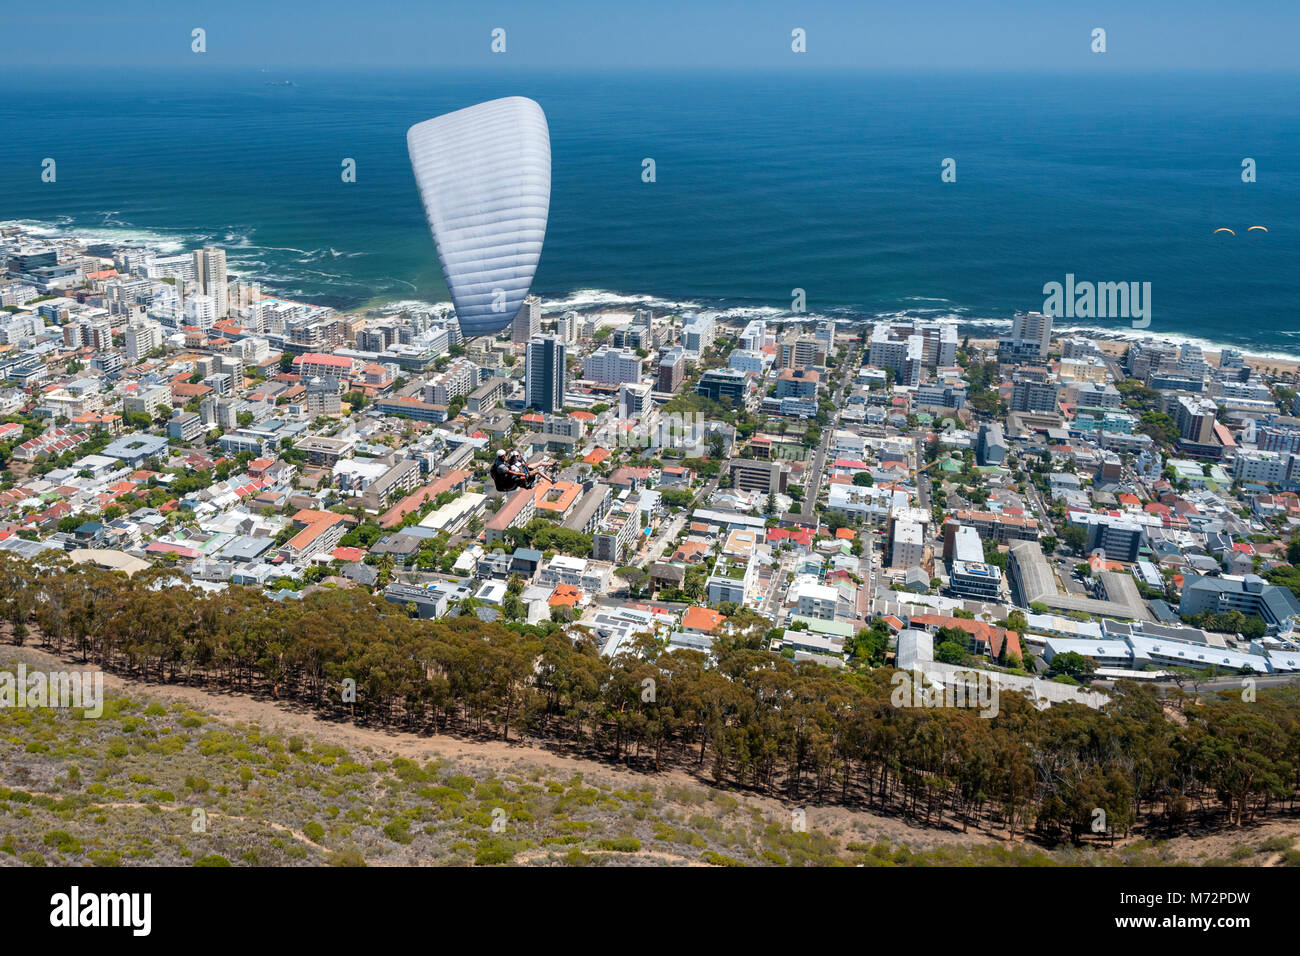 Tandem paraglider flying above Cape Town’s Atlantic seaboard suburbs. Stock Photo